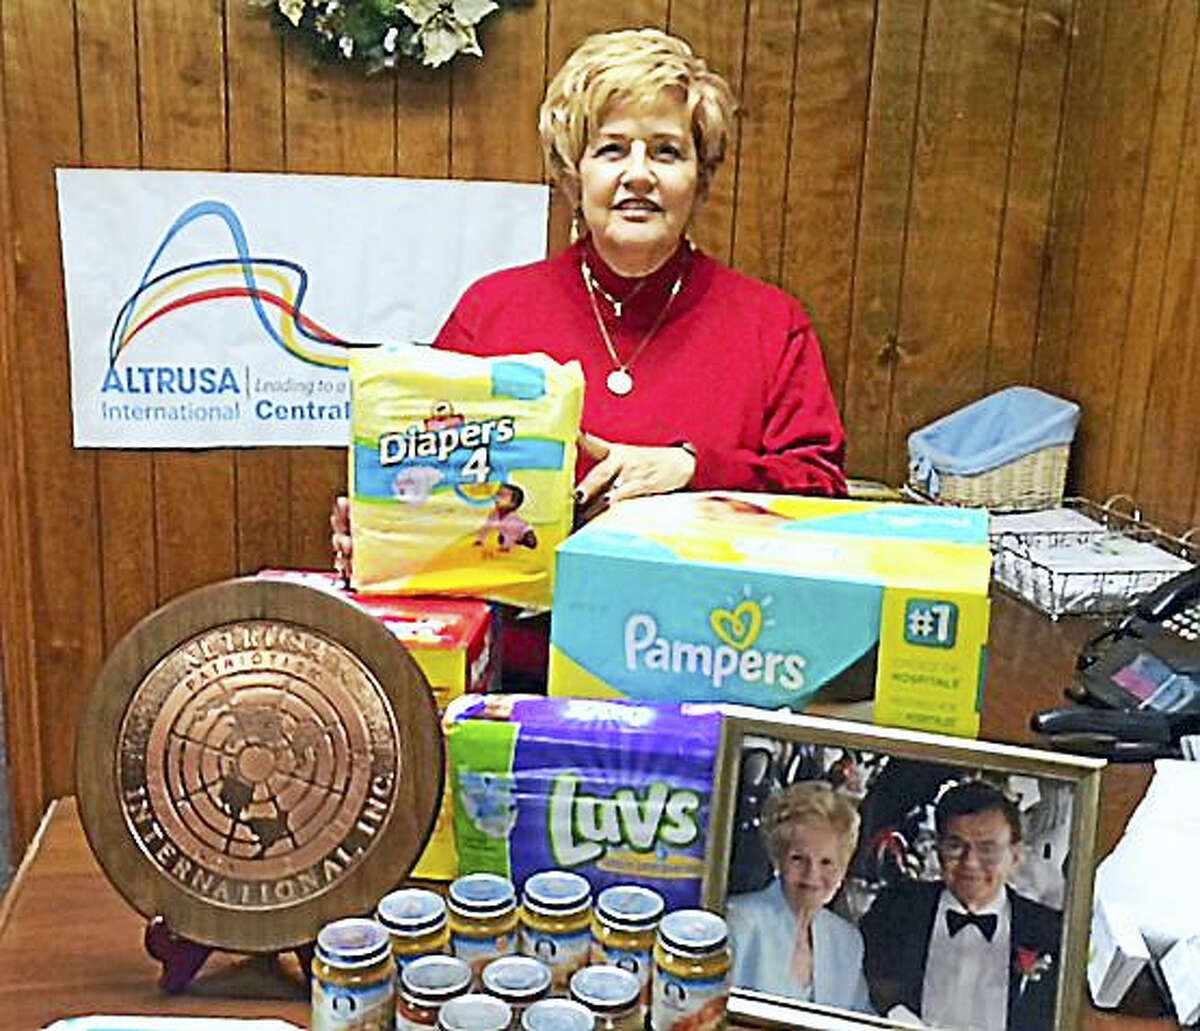 Kathleen Didato poses in front of an Altrusa banner, surrounded by donations for babies, and a photo of her parents, who inspire her work.